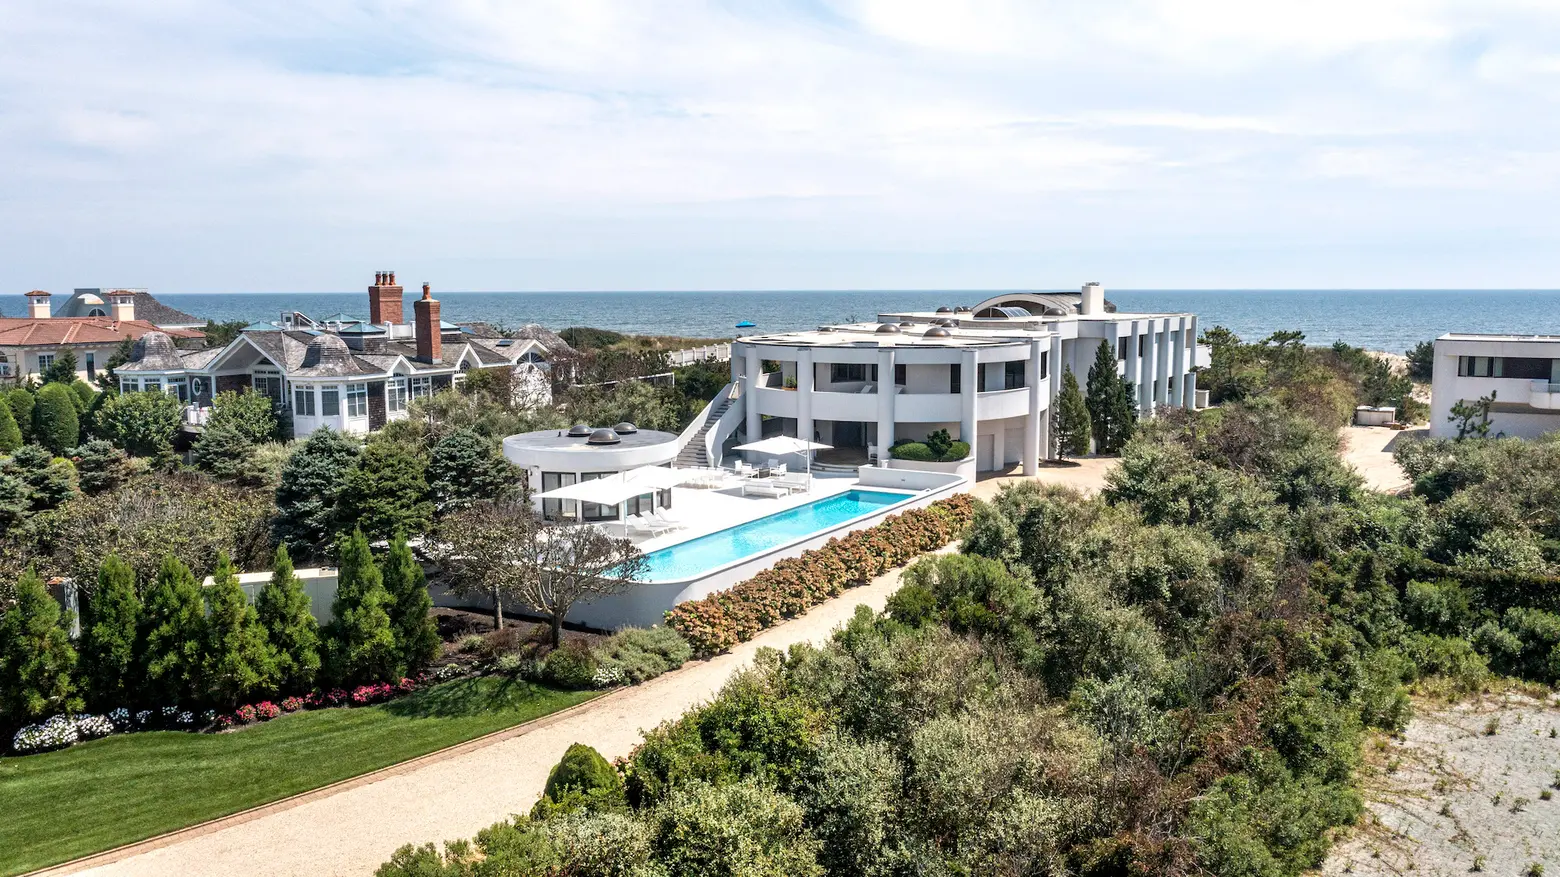 Catch some cool Miami vibes at this beachfront mansion in Quogue, asking $19.8M